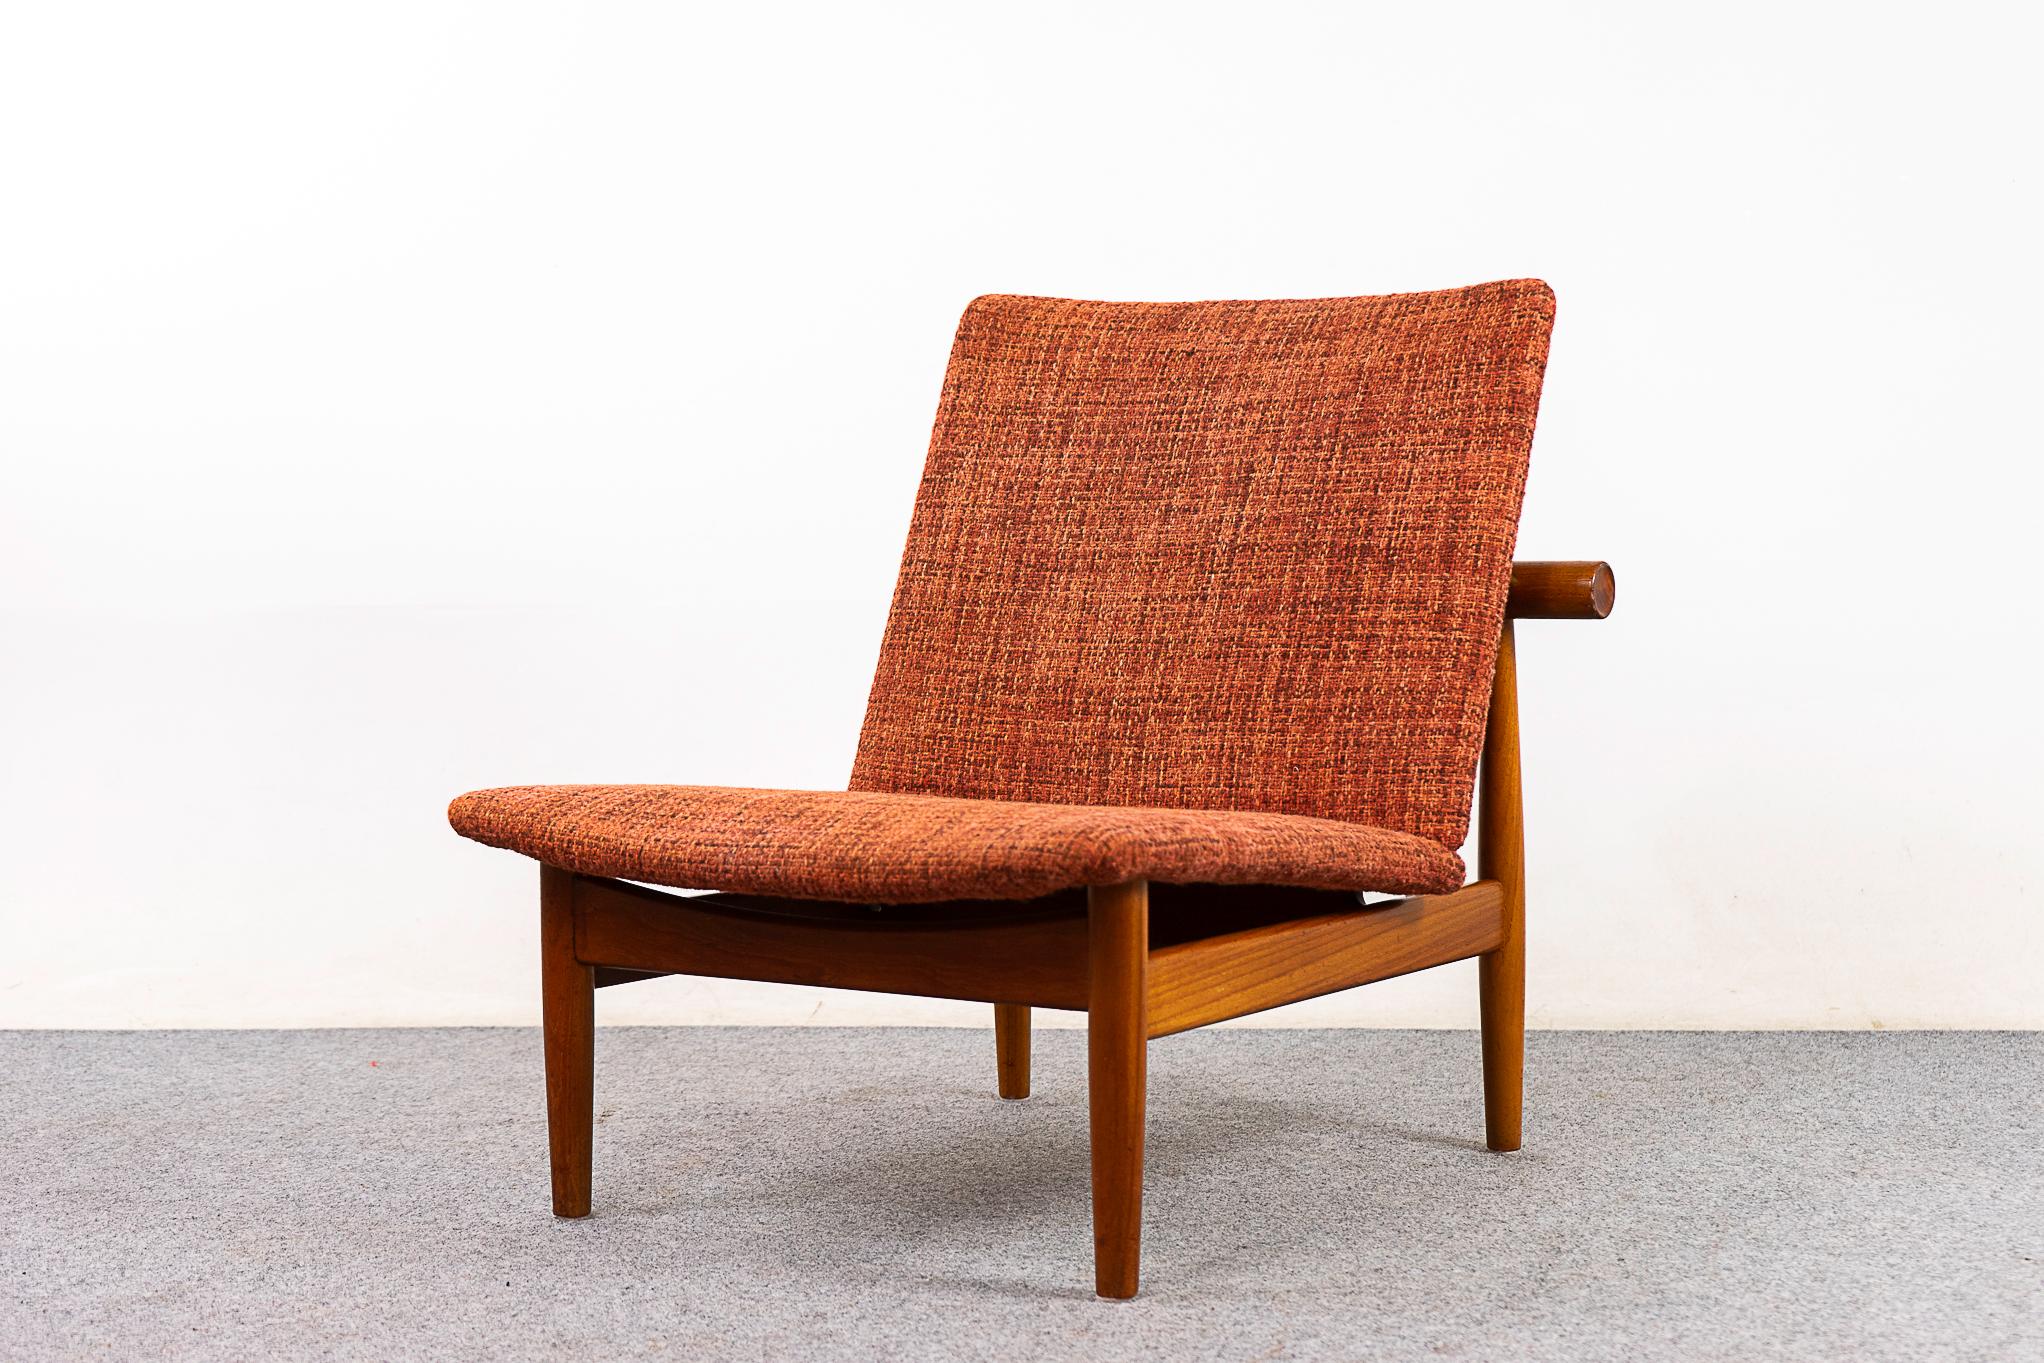 Teak Japan chair by Finn Juhl for France & Son, 1957. Simple, elegant frame inspired by Japanese temple doors. Tapered legs, brass hardware and horizontal back rest with recessed circular ends. France & Son makers mark intact.